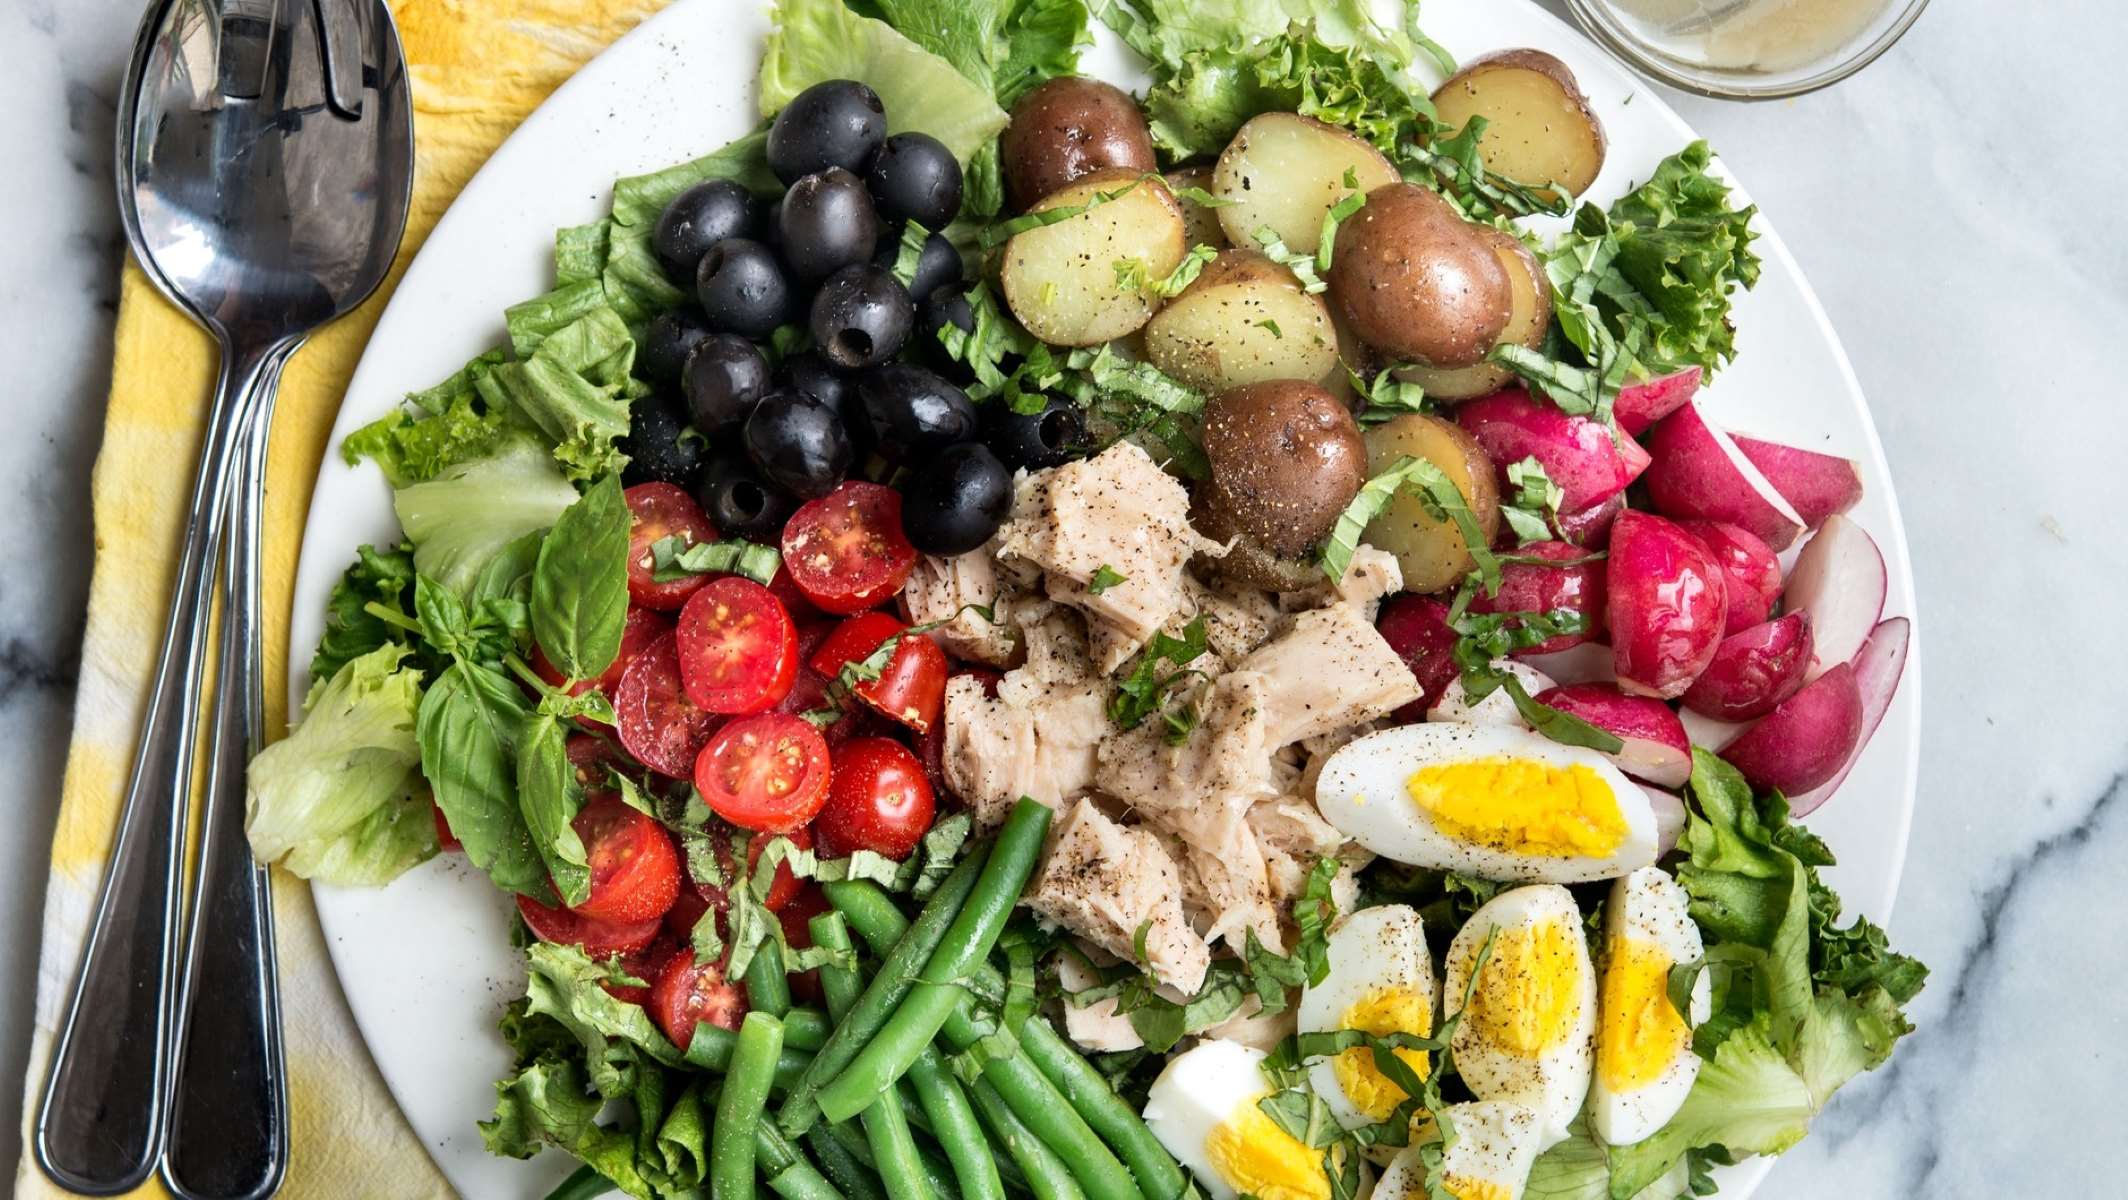 French Nicoise Salad - A Delicious And Authentic Dish For French Fridays